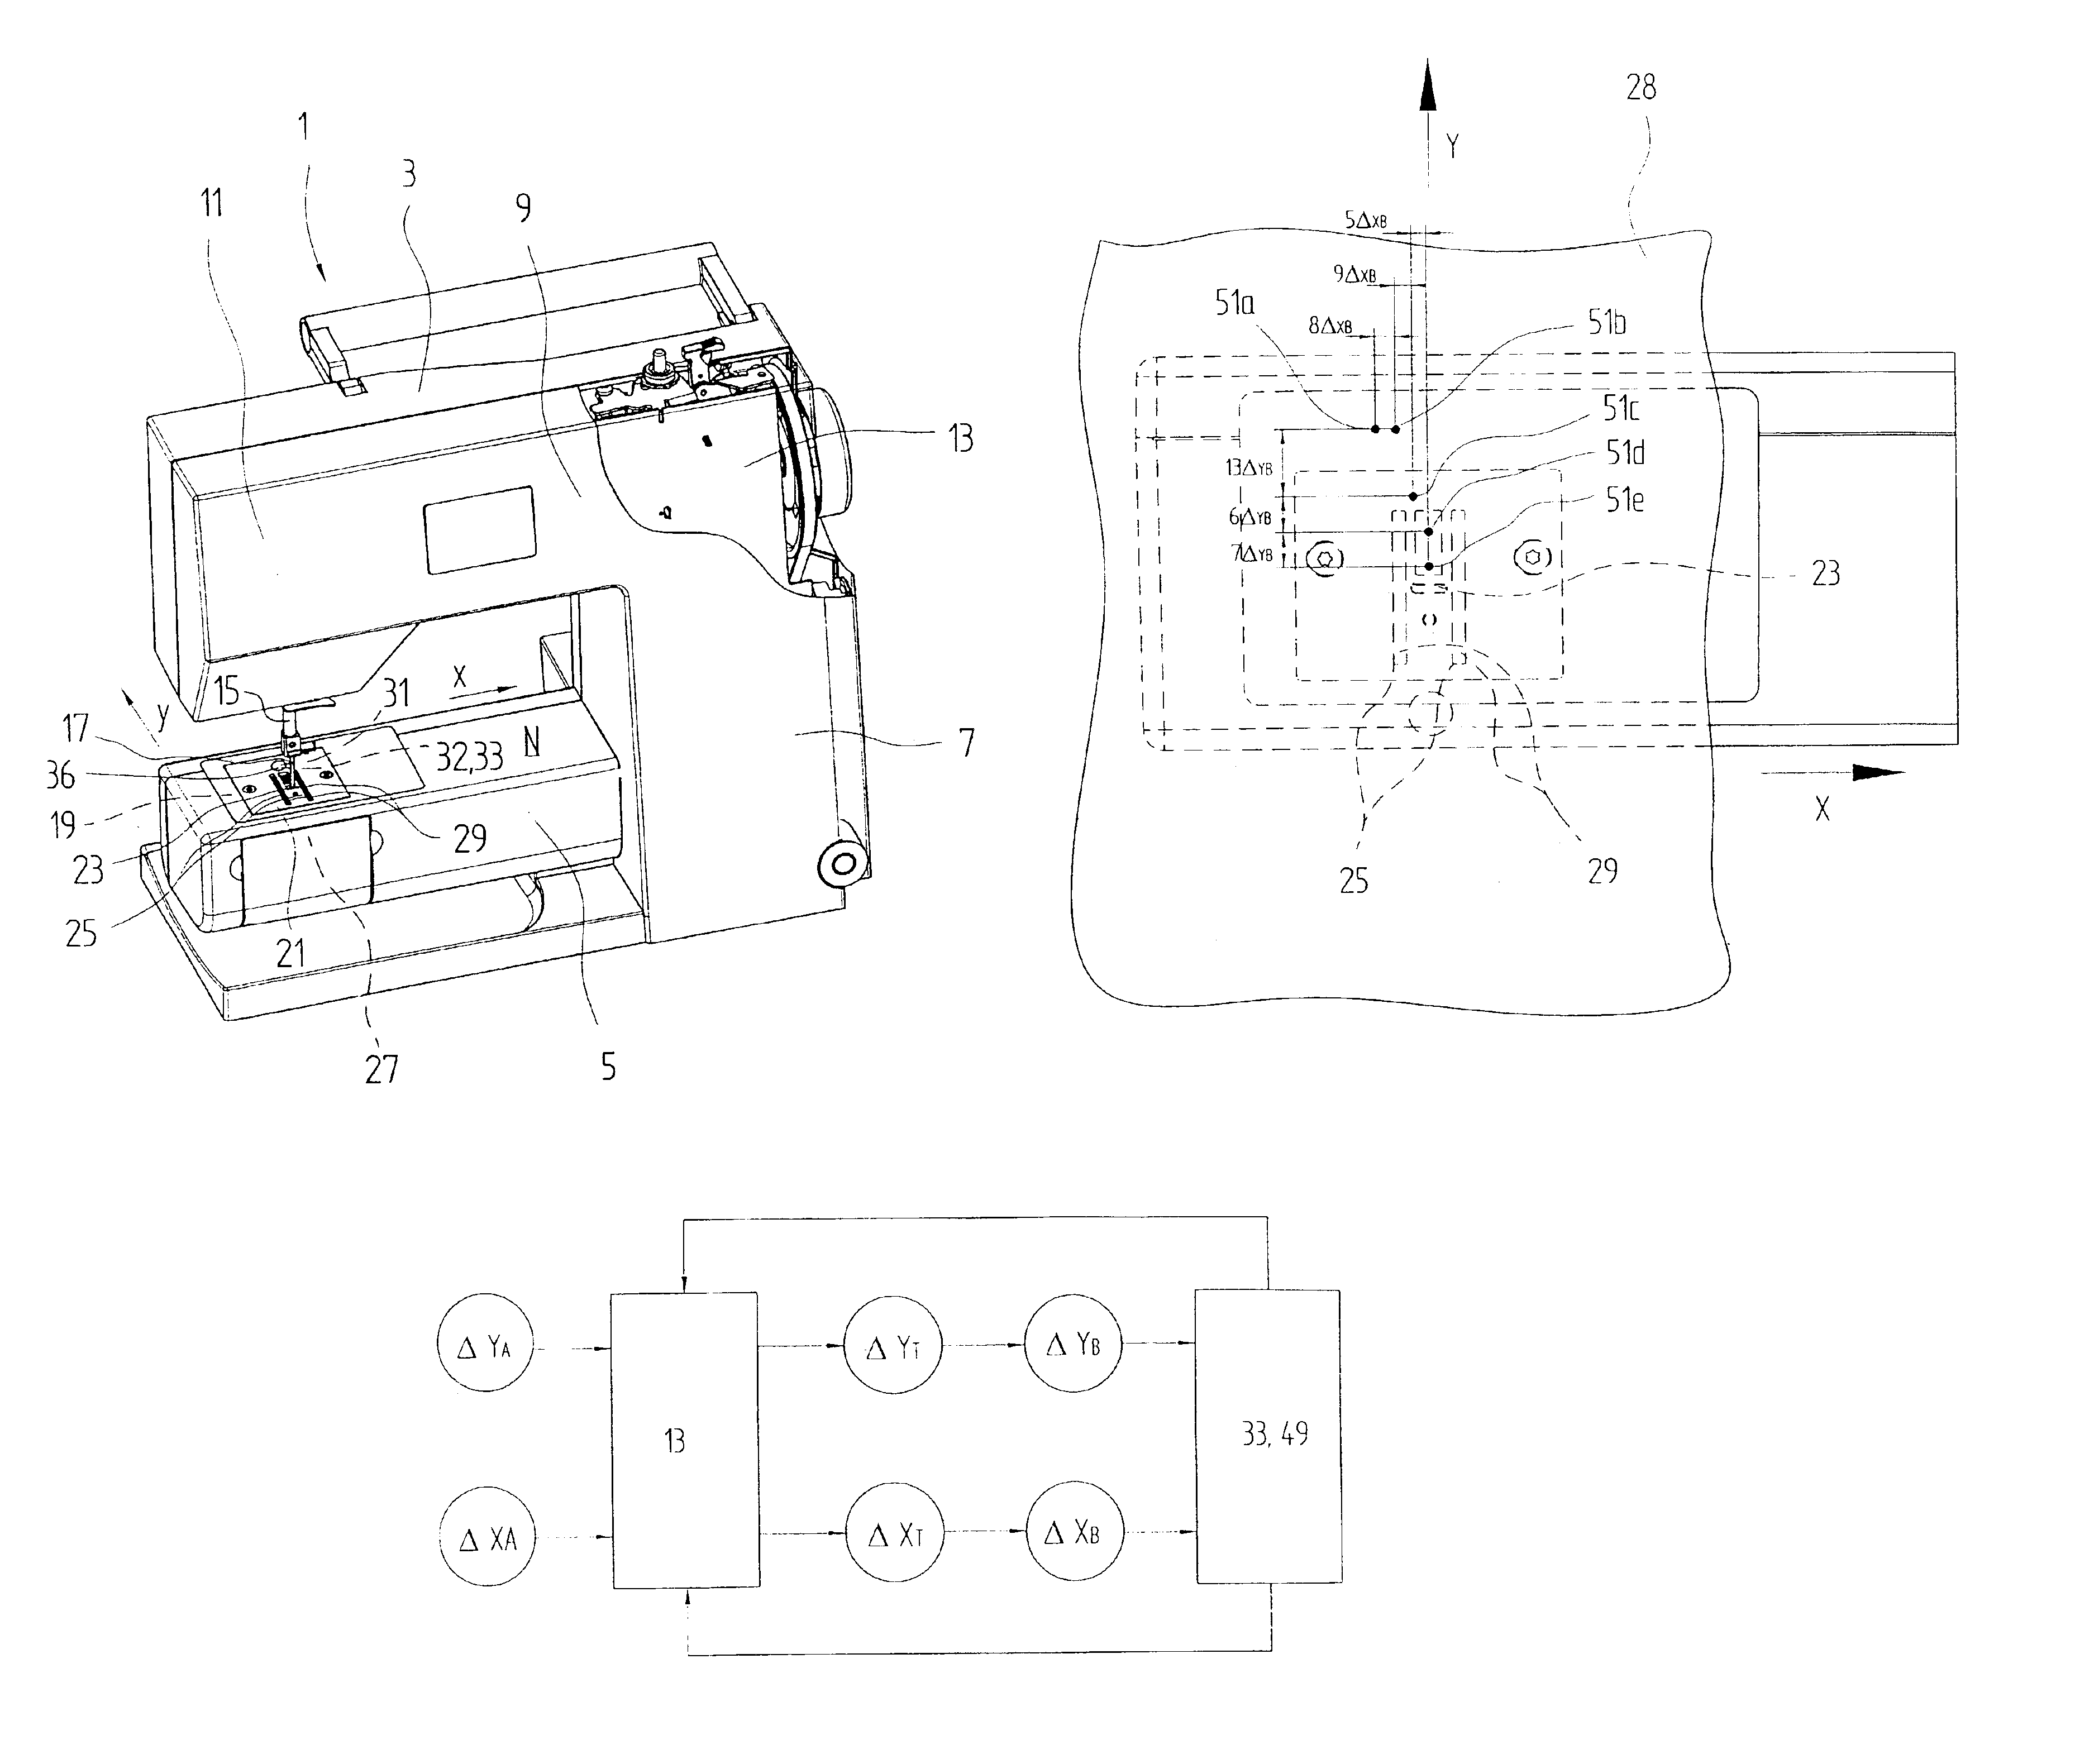 Method and device for regulating material transport in a sewing or embroidery machine